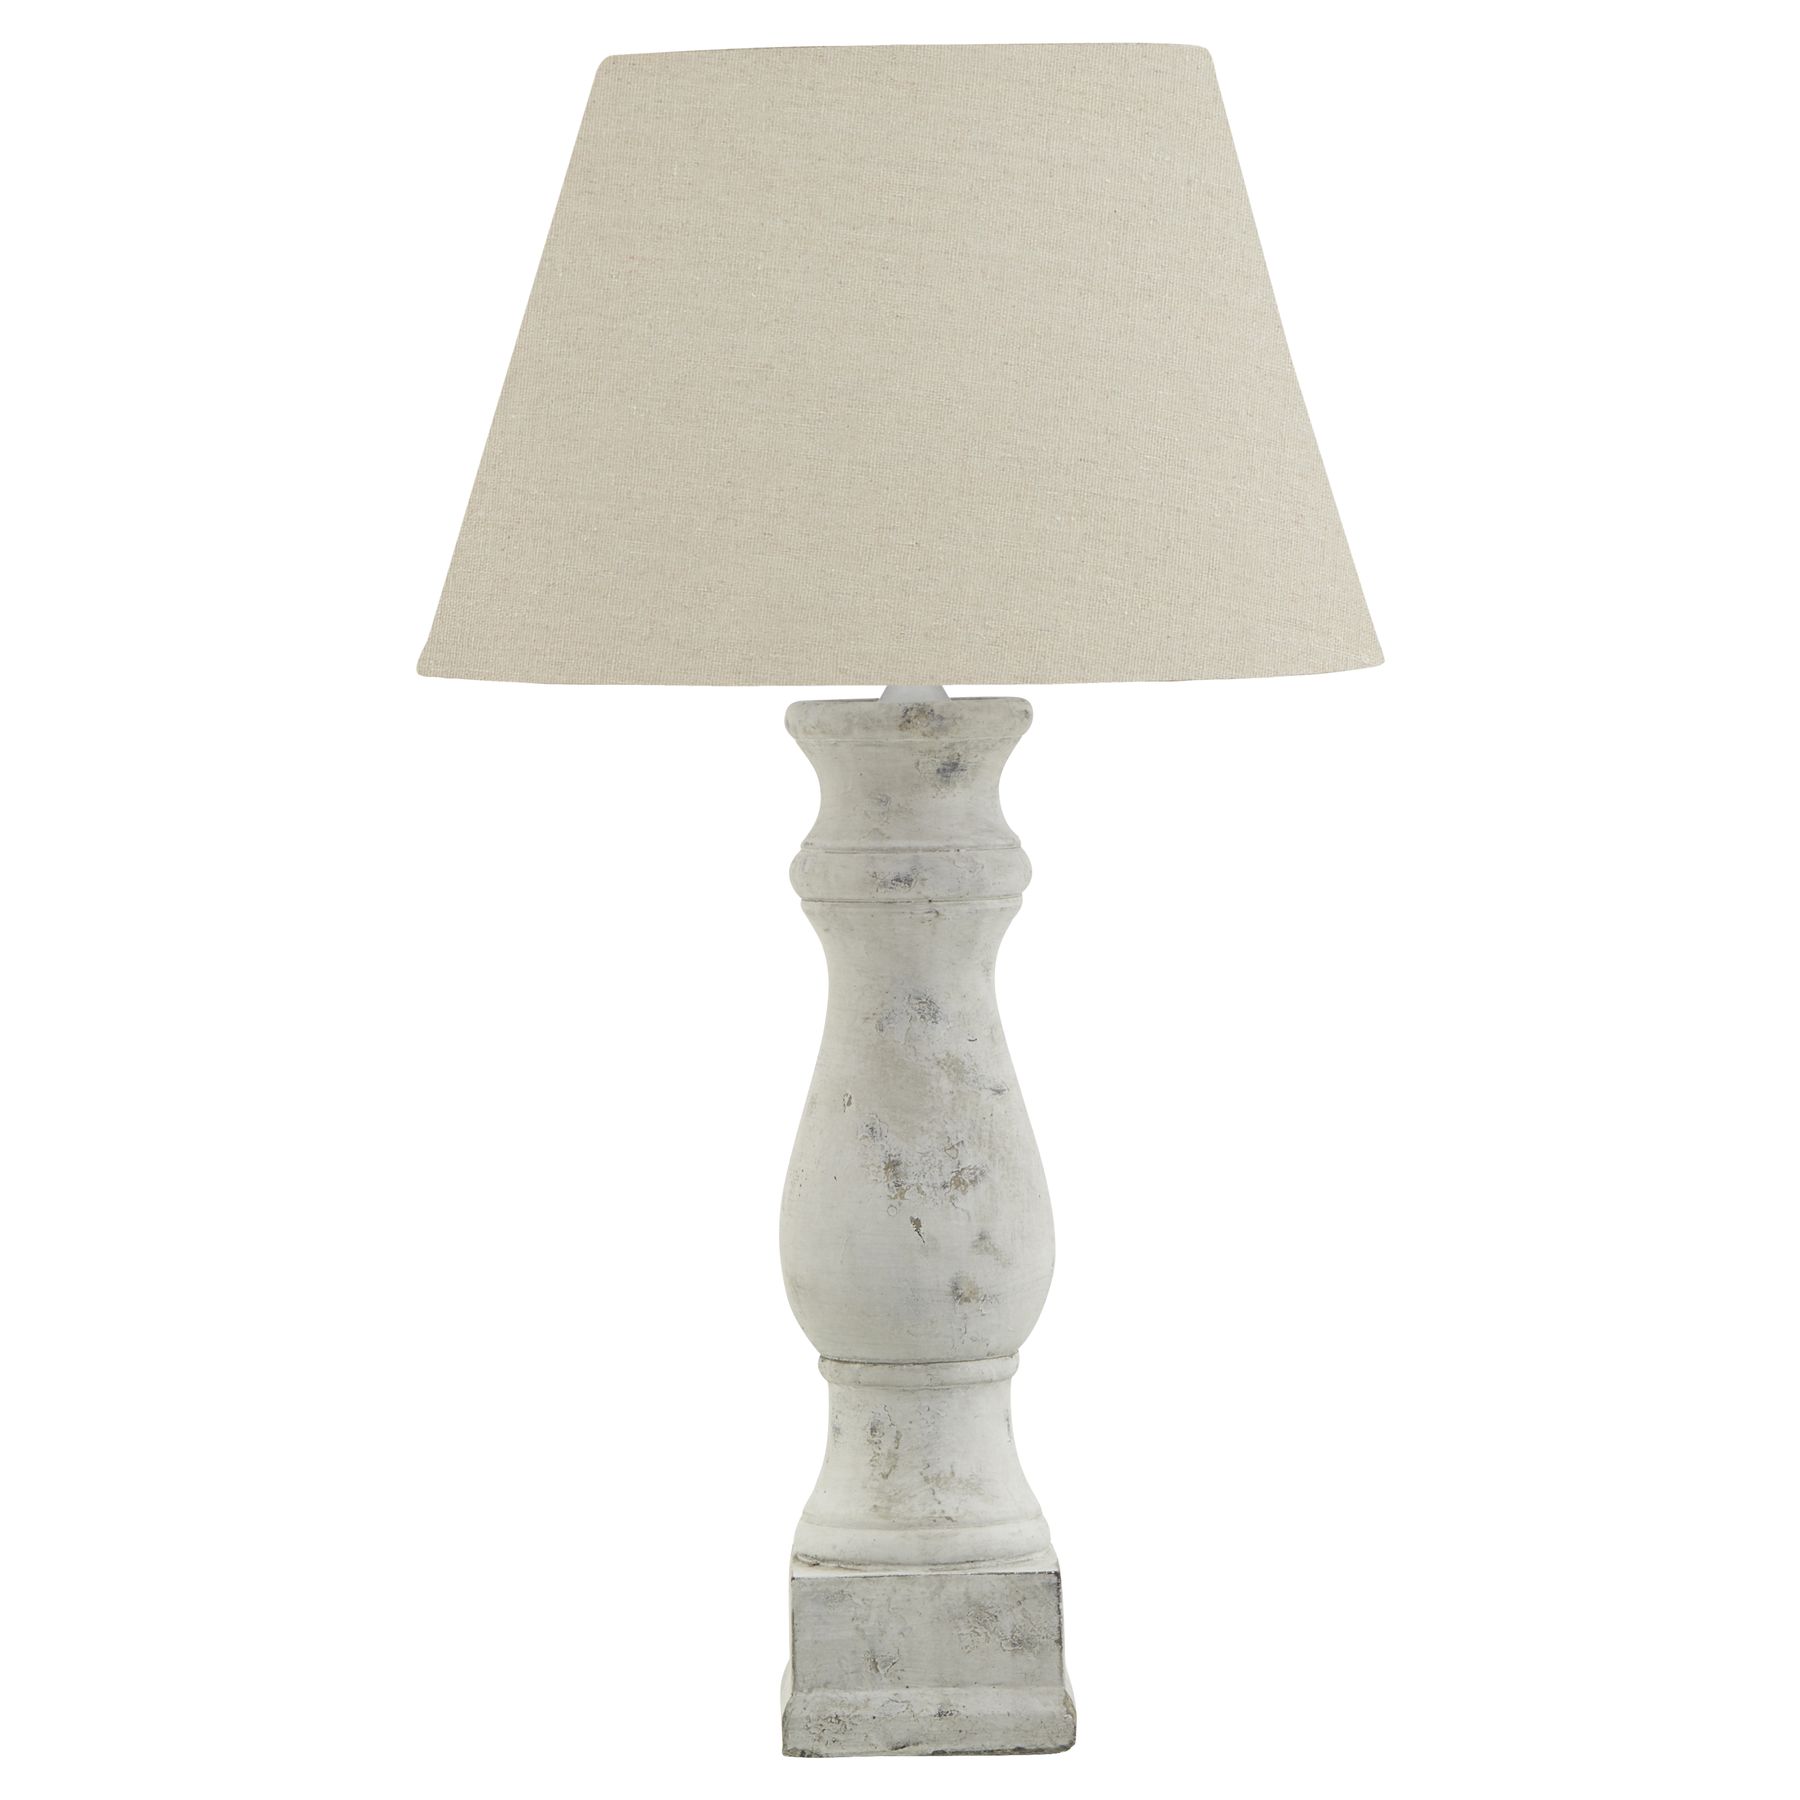 Darcy Antique White Candlestick Table Lamp With Linen Shade - Image 1